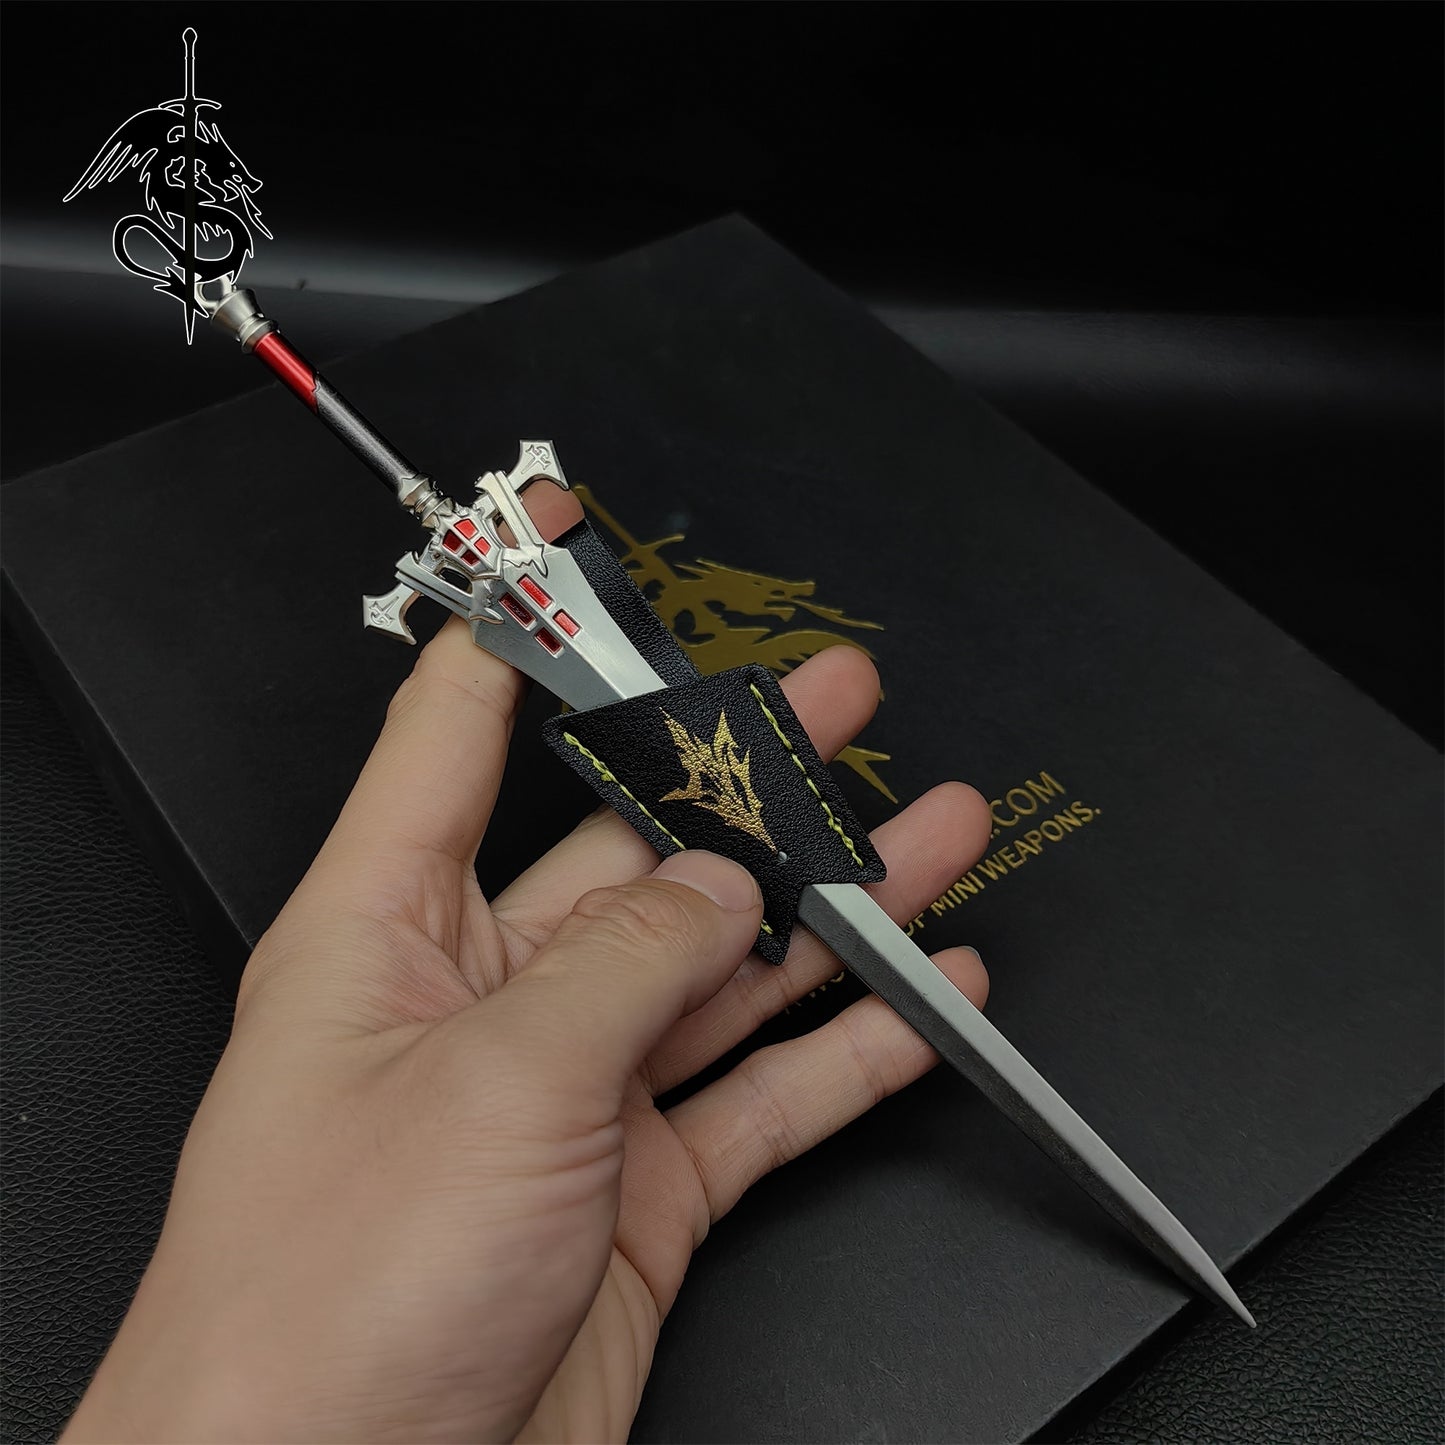 Cloud Final Fantasy Game Weapon Tiny Sword 4 In 1 Gift Box